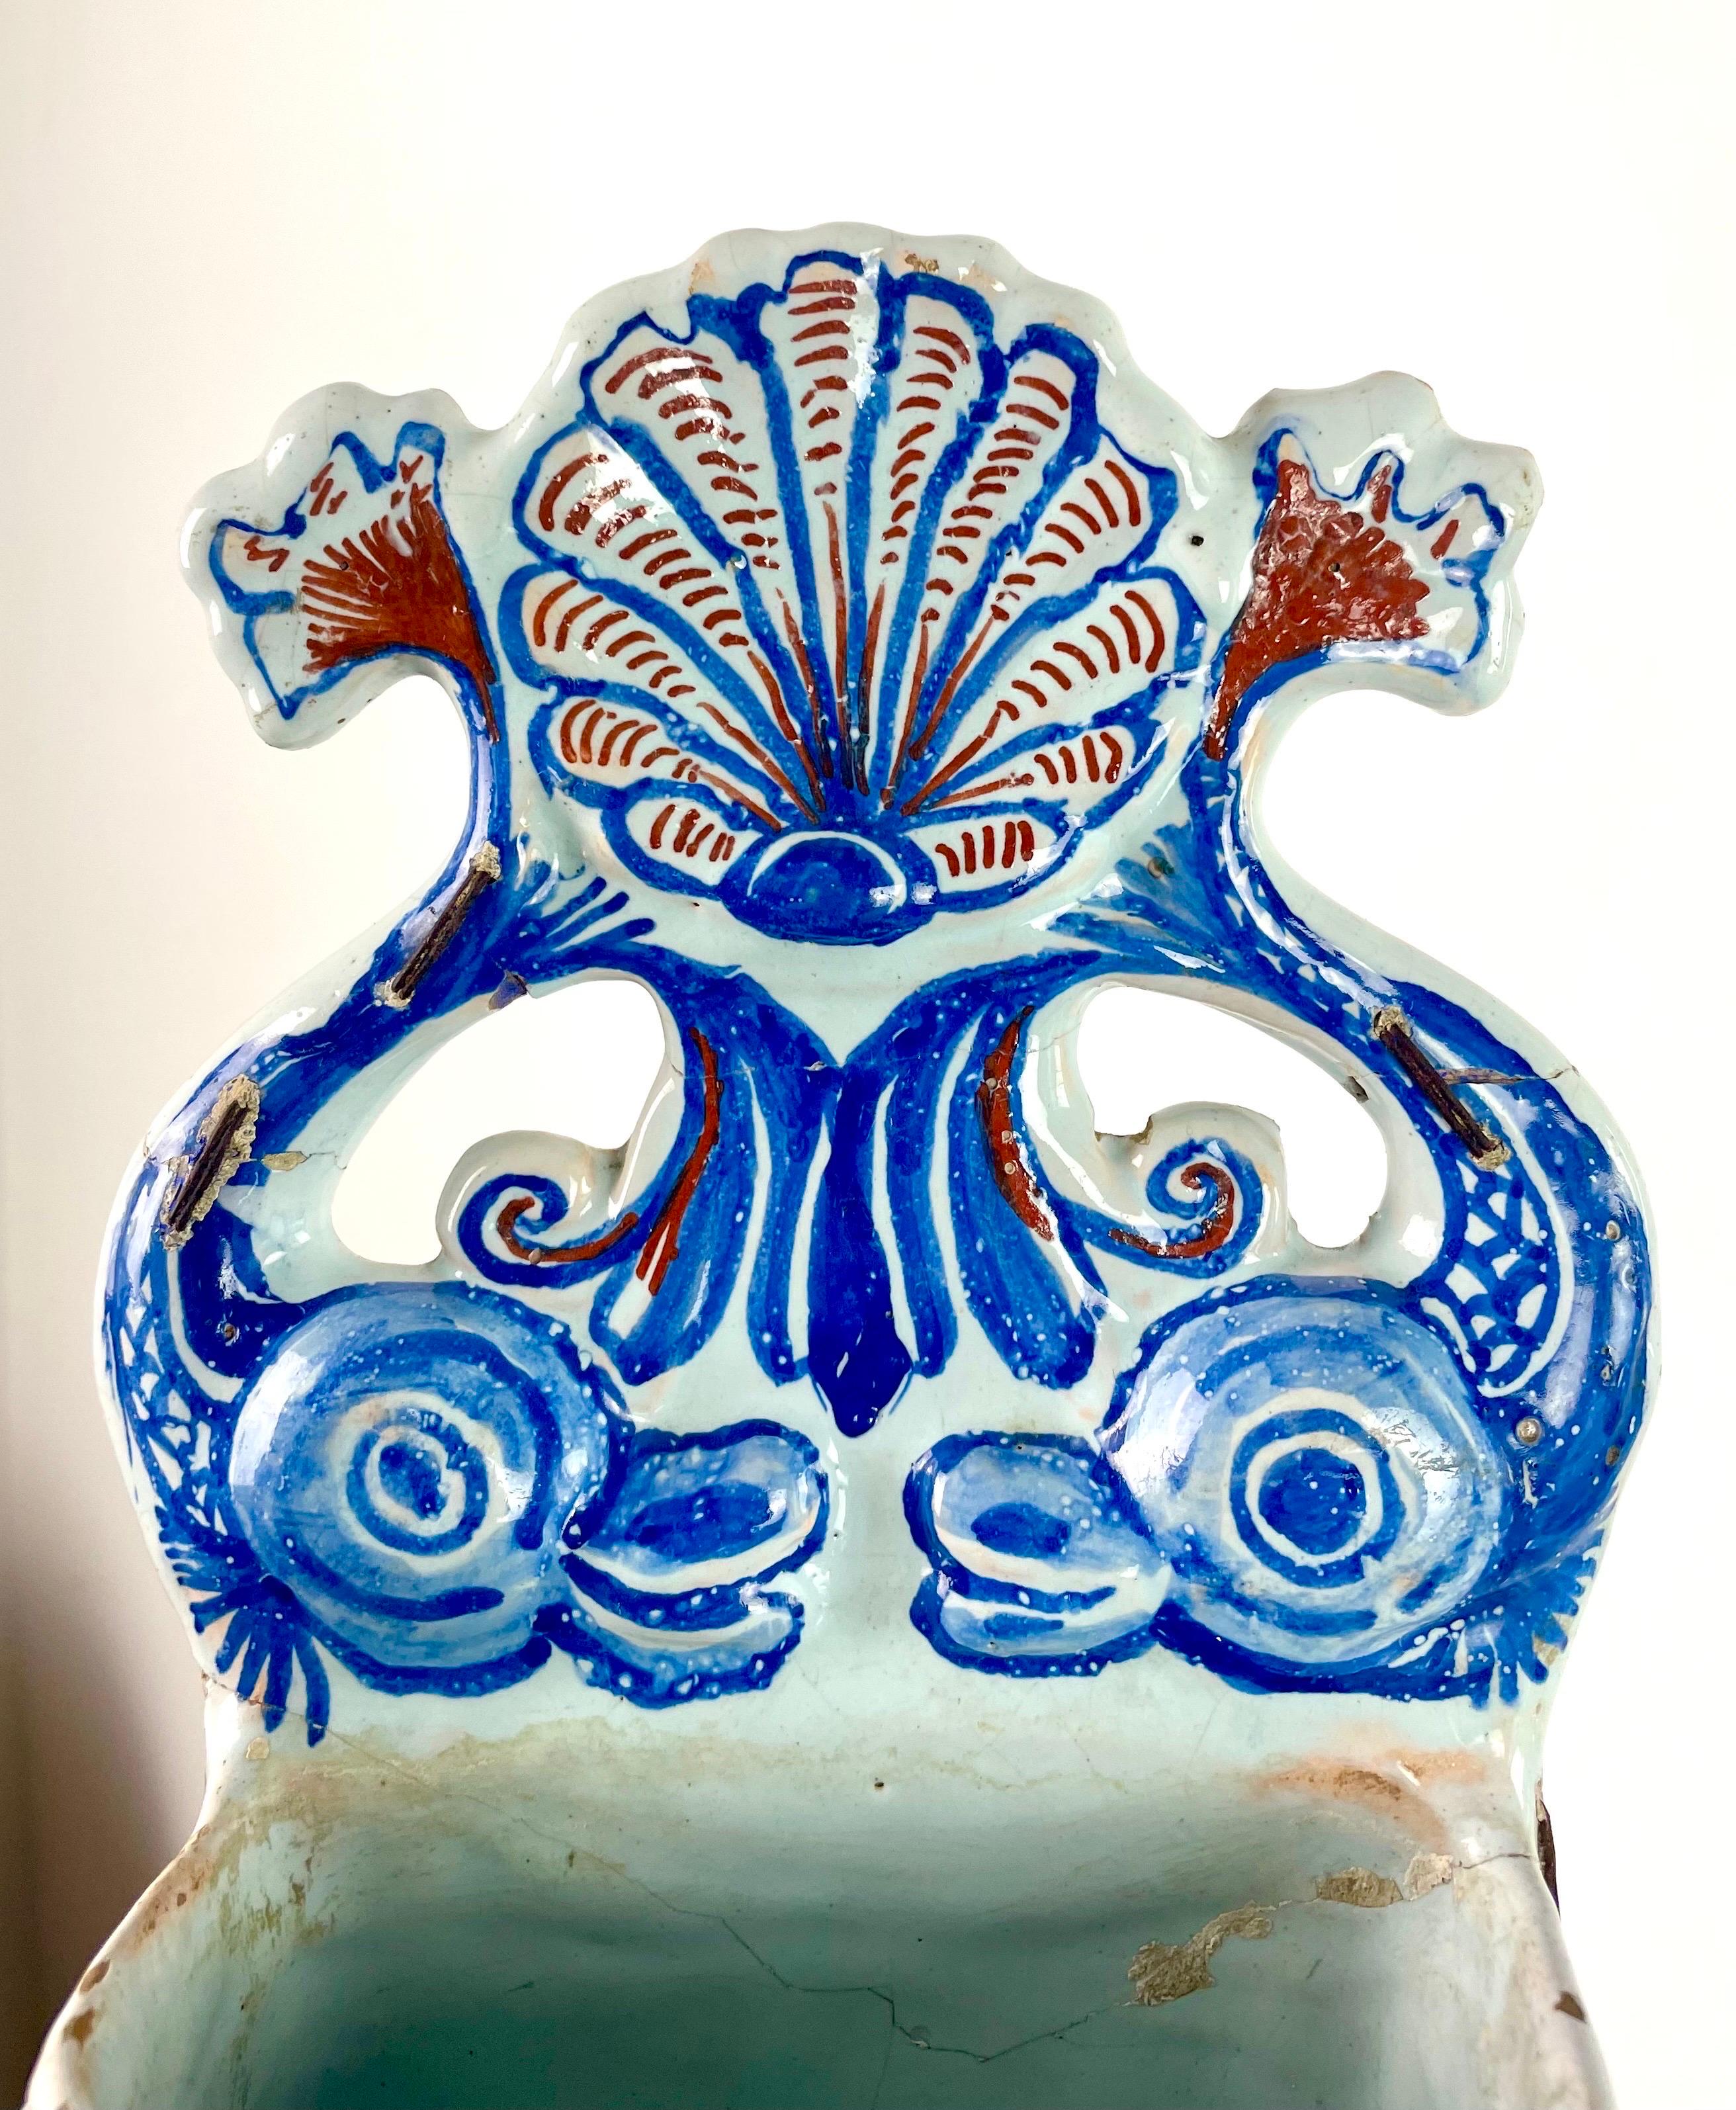 Vase - Rouen earthenware fountain, flower pot - blue white - 18th century France In Good Condition For Sale In Beuzevillette, FR